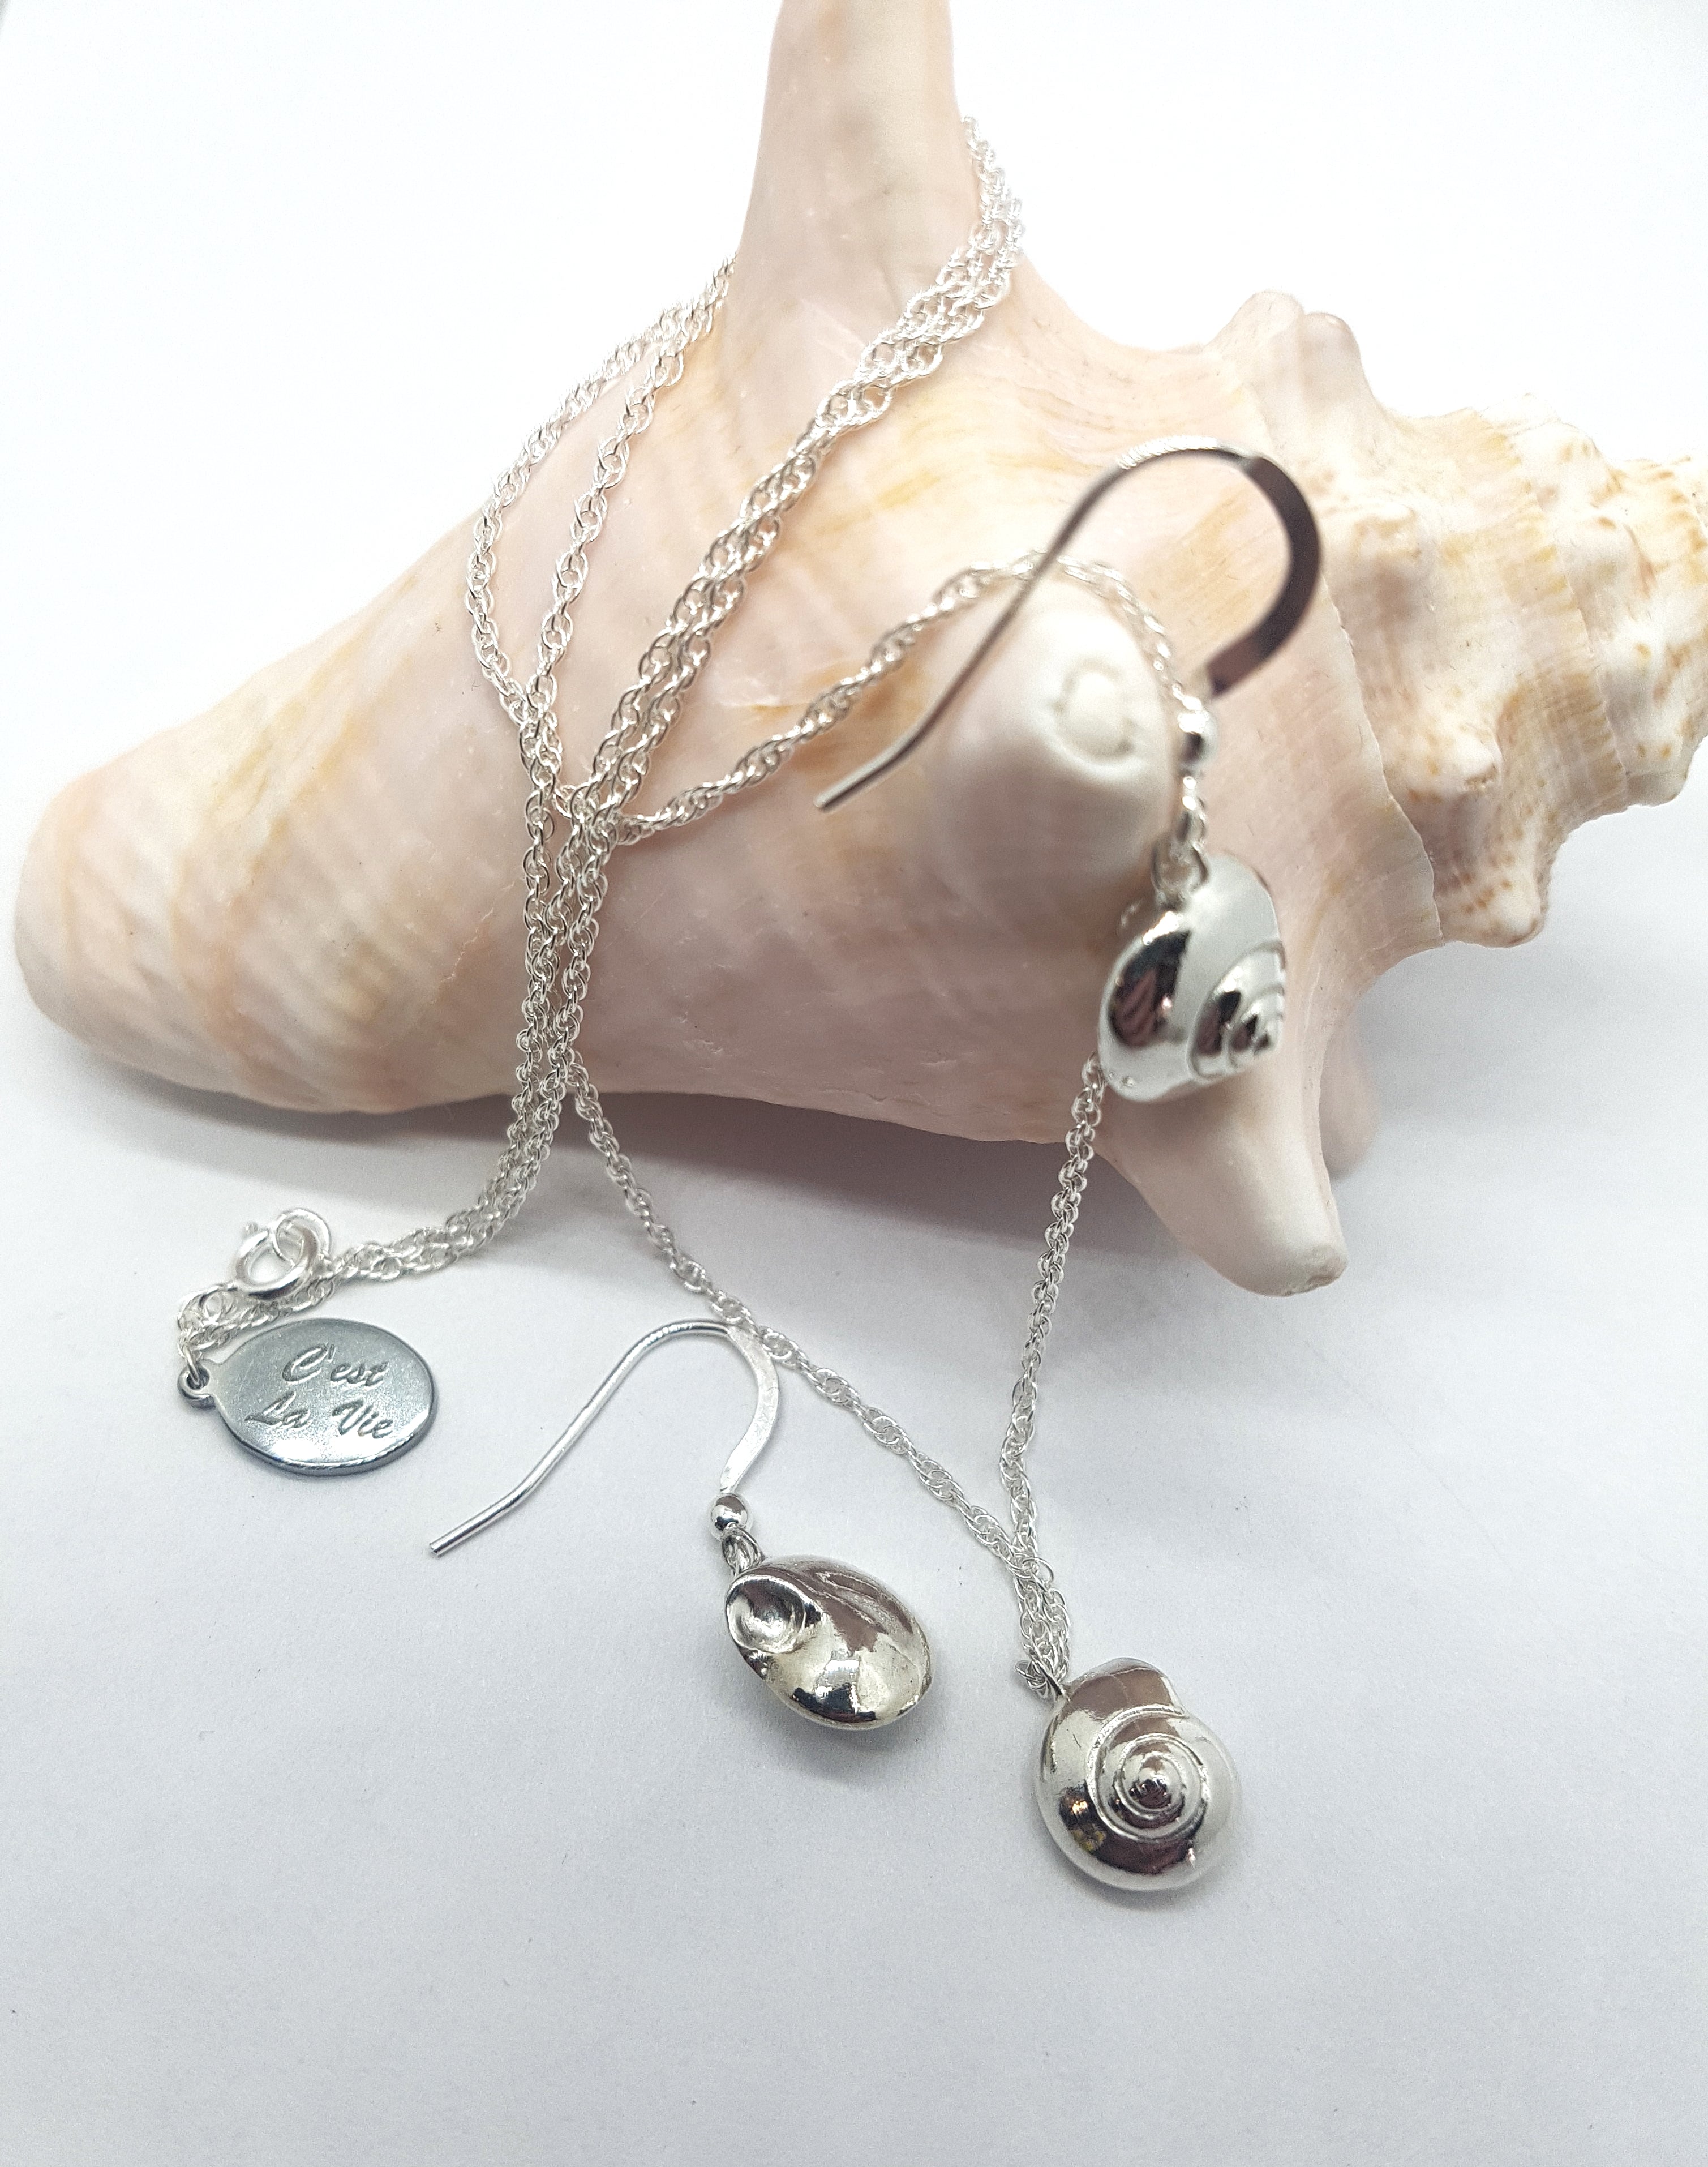 Whorled Silver Shell - Necklace